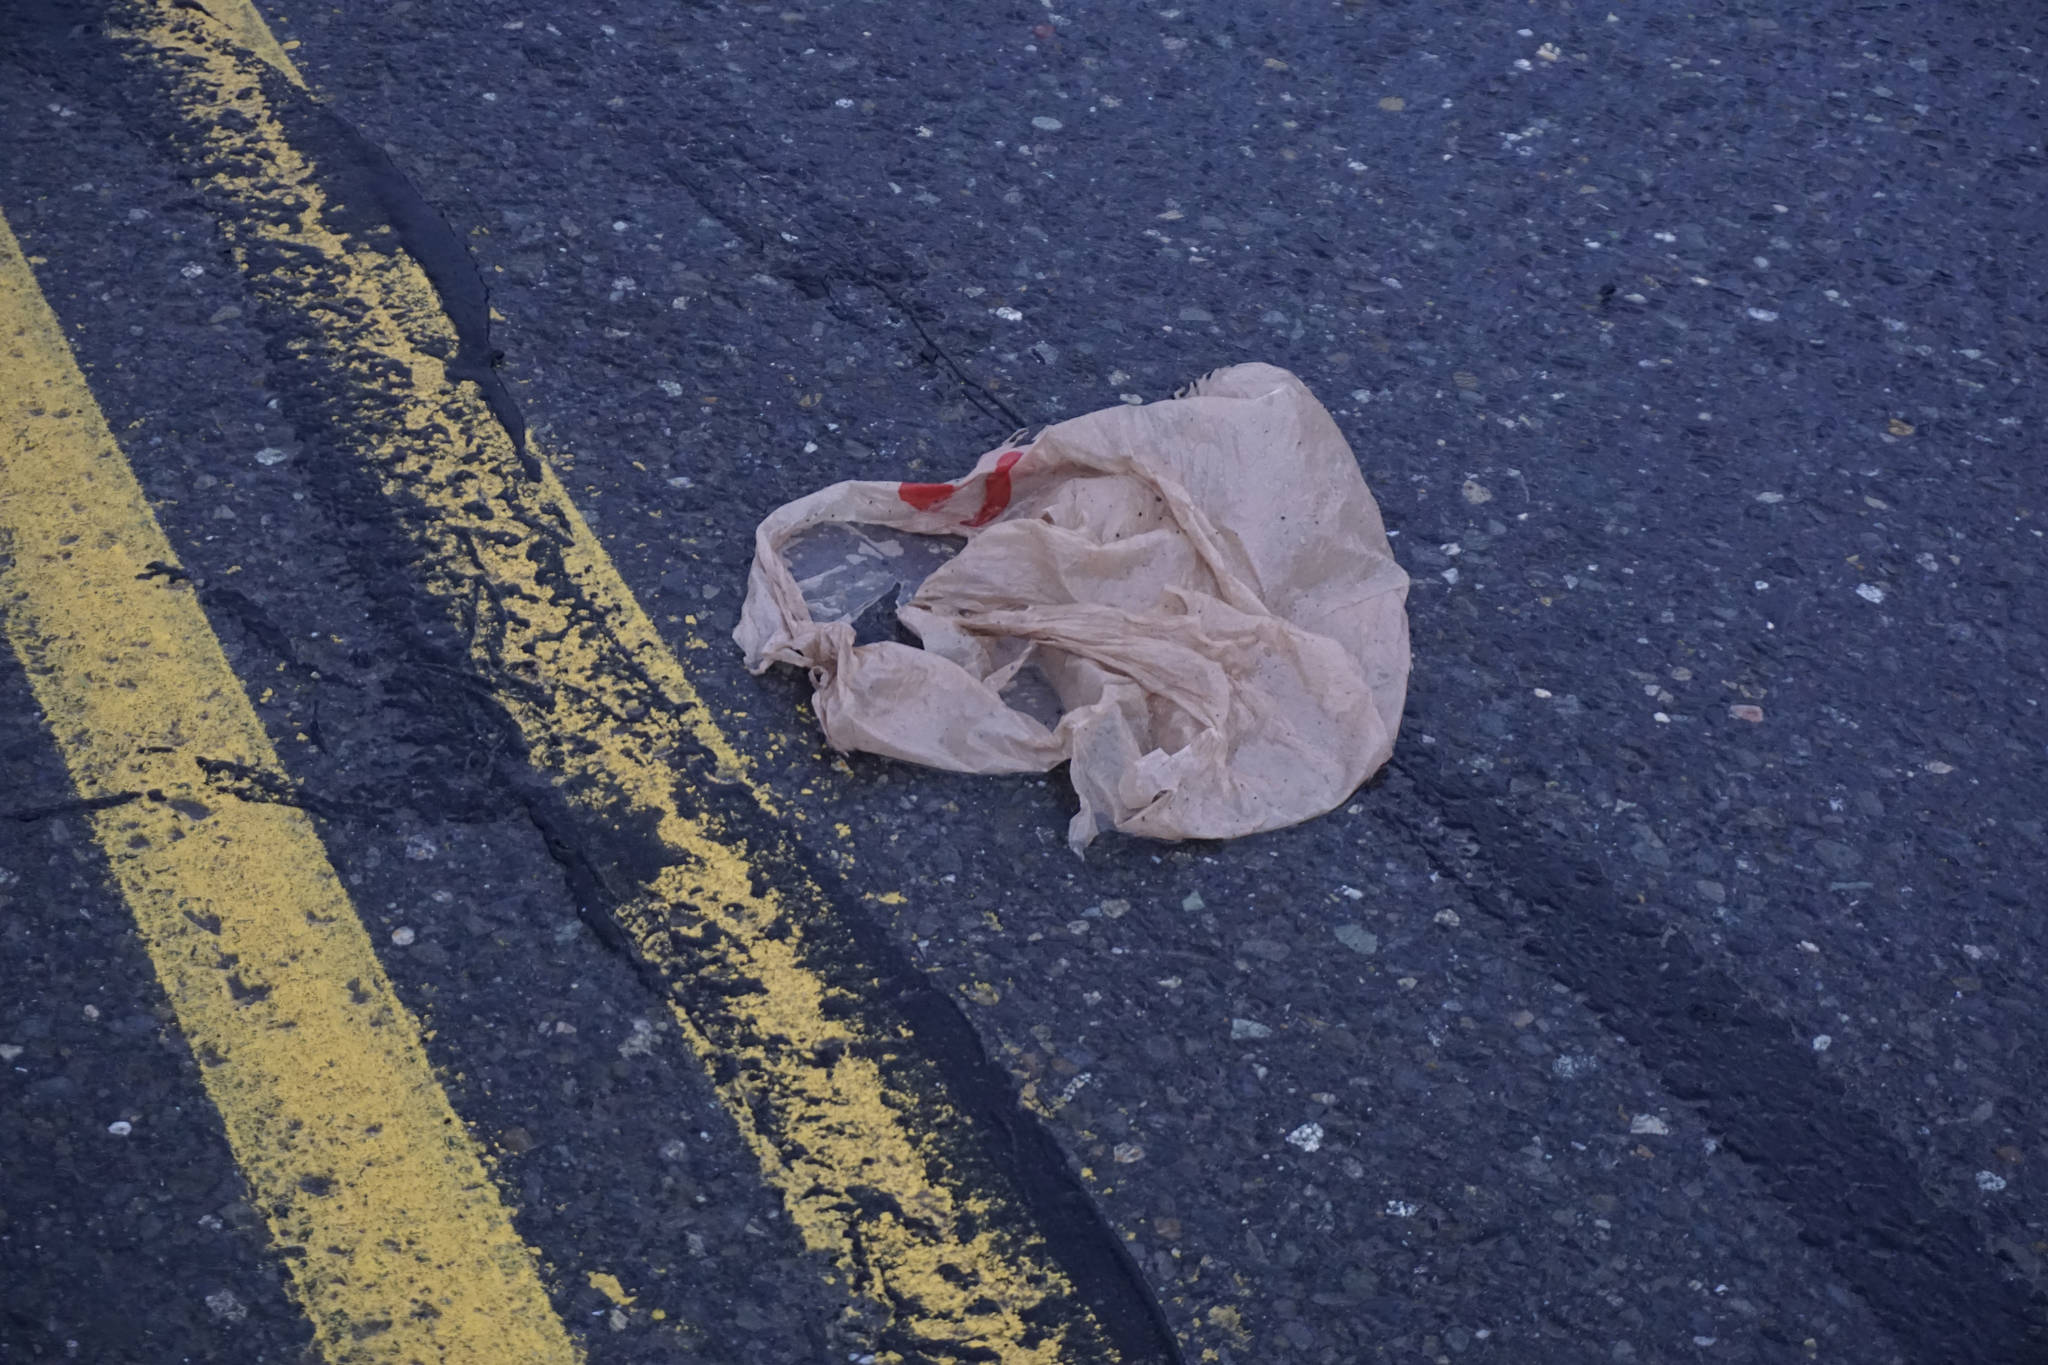 A single-use thin plastic shopping bag lies in the middle of Diamond Ridge Road on Oct. 22, 2018, in Homer, Alaska. The Homer City Council at its meeting Monday passed an ordinance to put on the October 2019 ballot the question of if voters want to ban retailers from giving out single-use plastic bags in Homer. Proponents of the bag ban argue that the bags contribute to litter. (Photo by Michael Armstrong/Homer News)